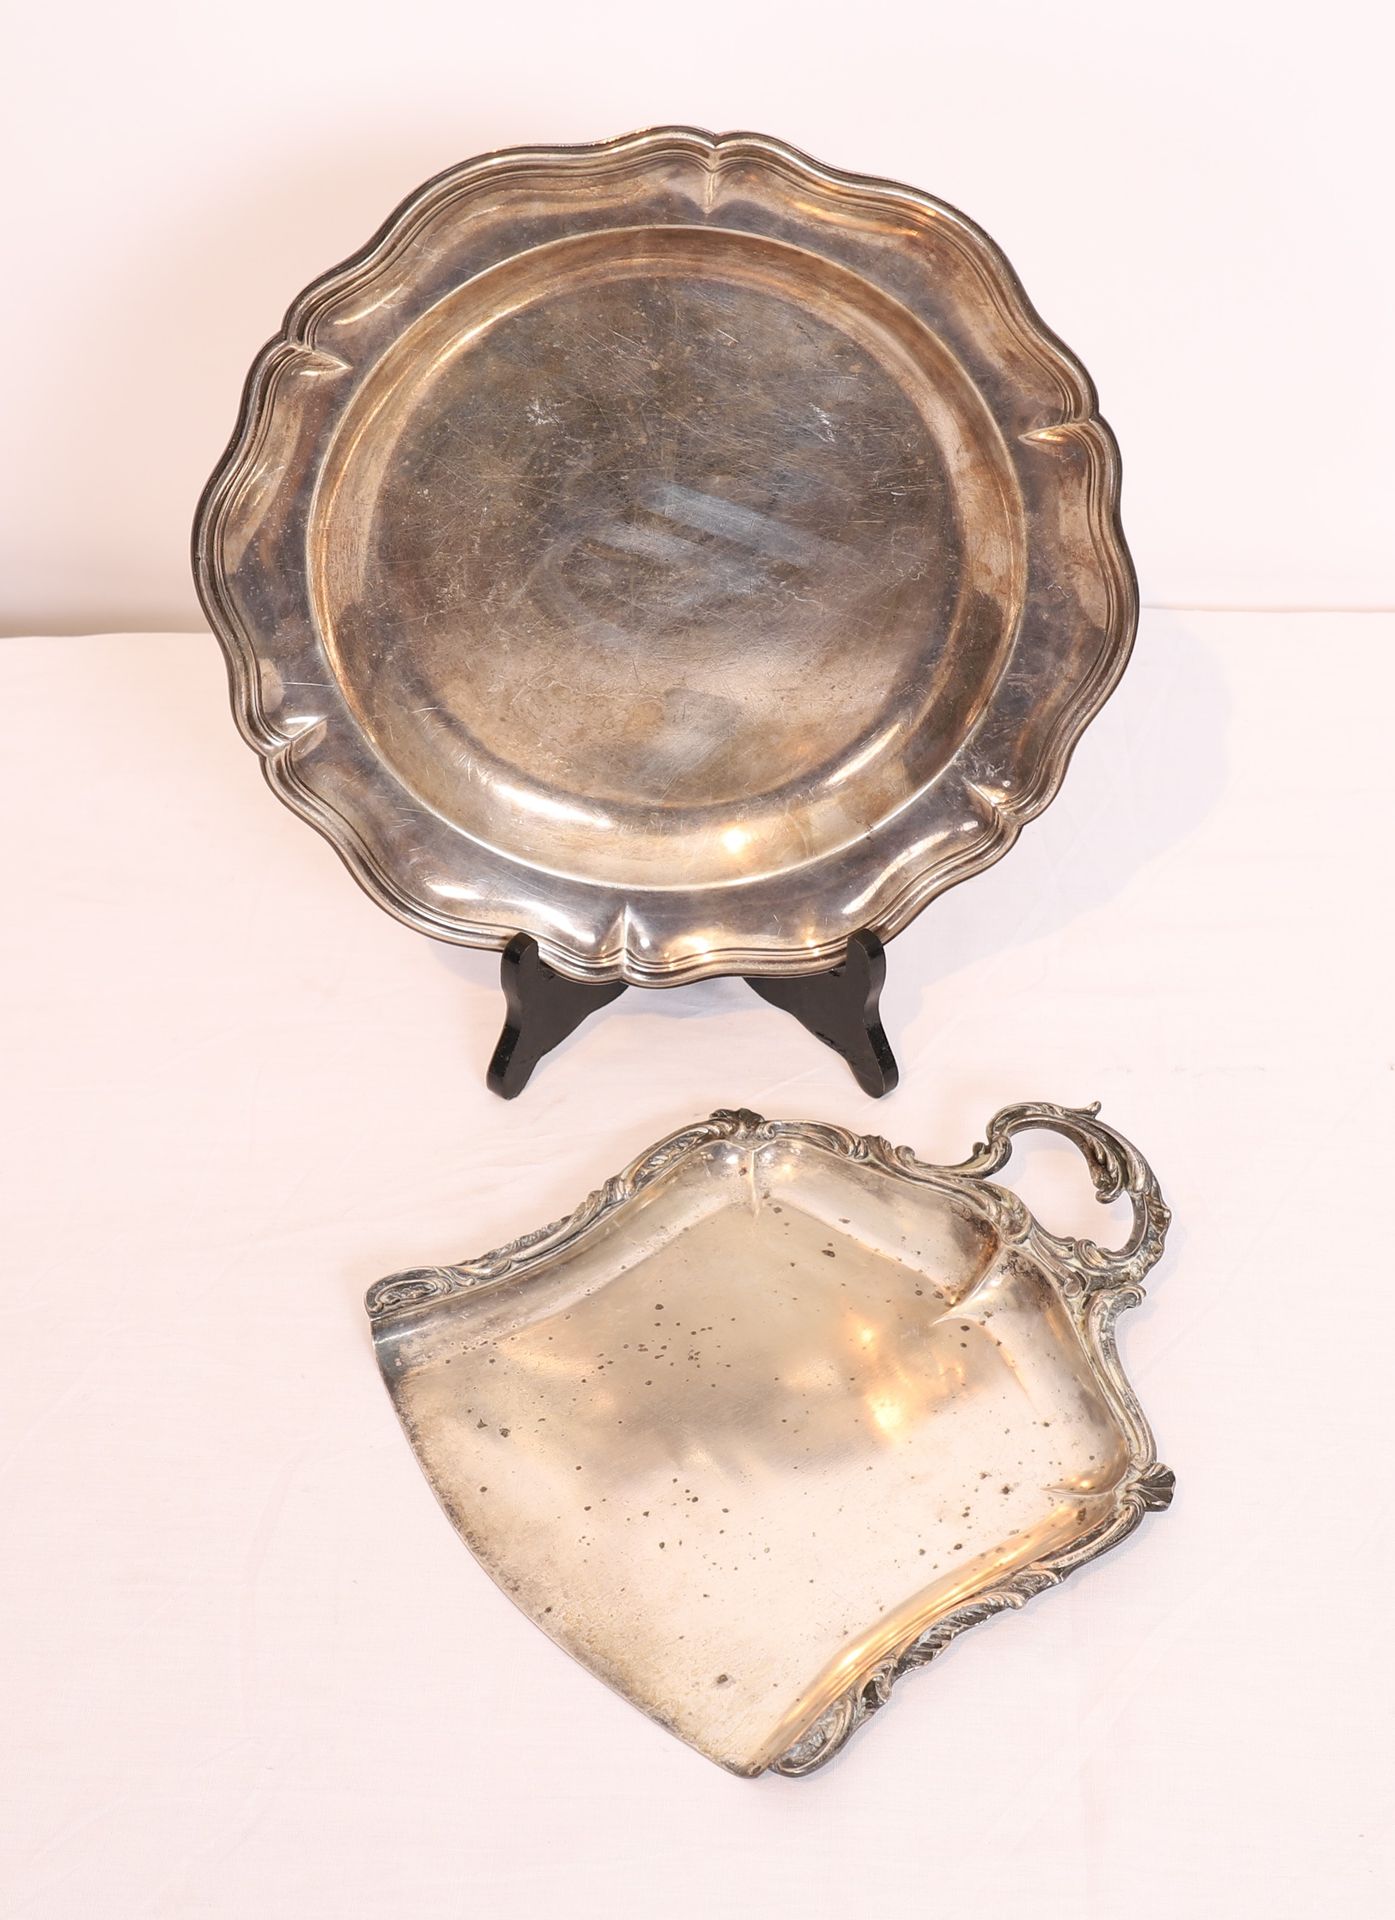 Null NICE SILVER DISH WITH CURVED EDGES

In silver with the mark S

Gross weight&hellip;